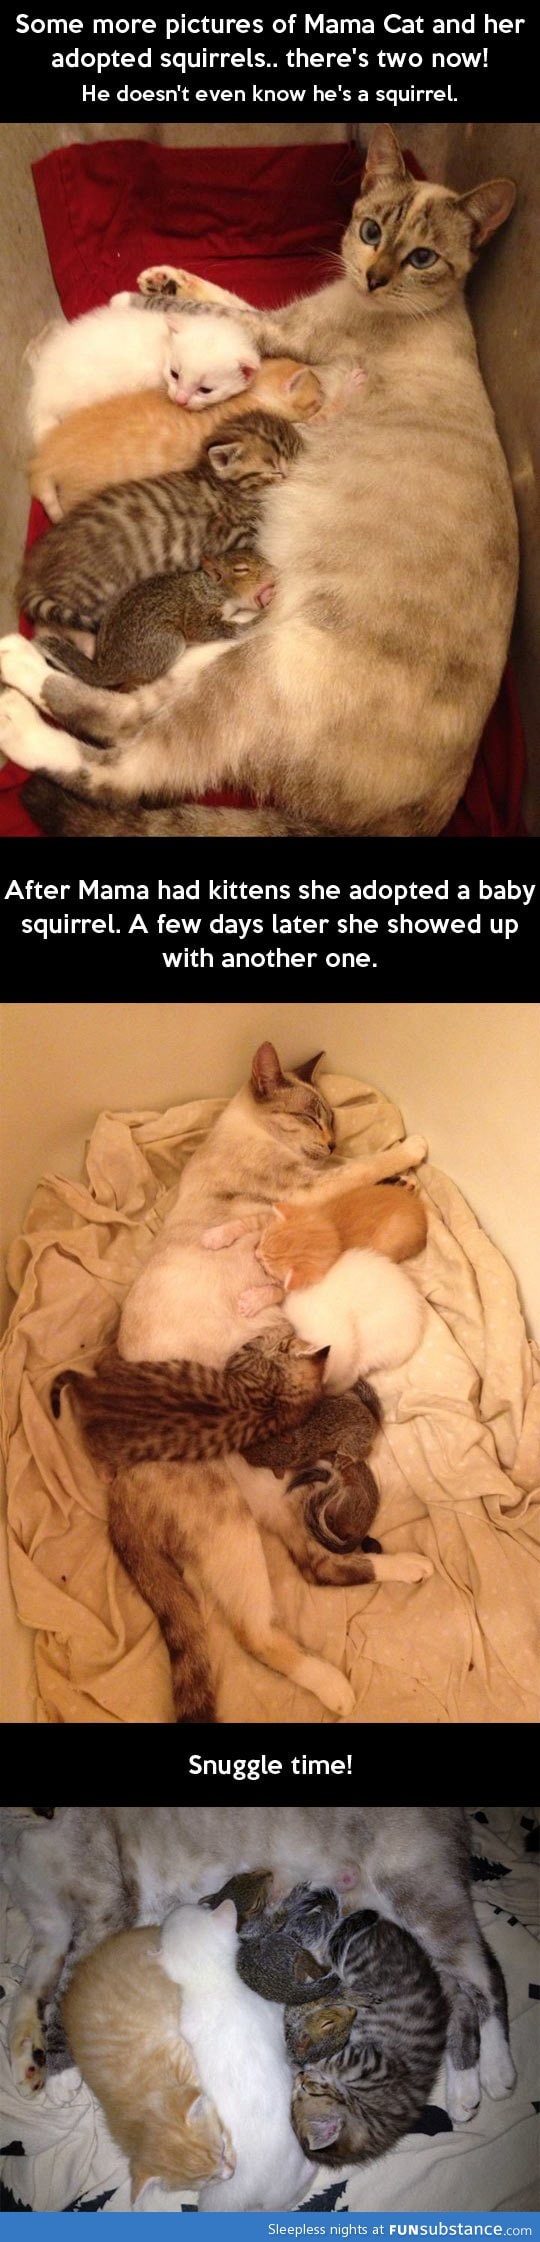 Mama cat and her adopted squirrels